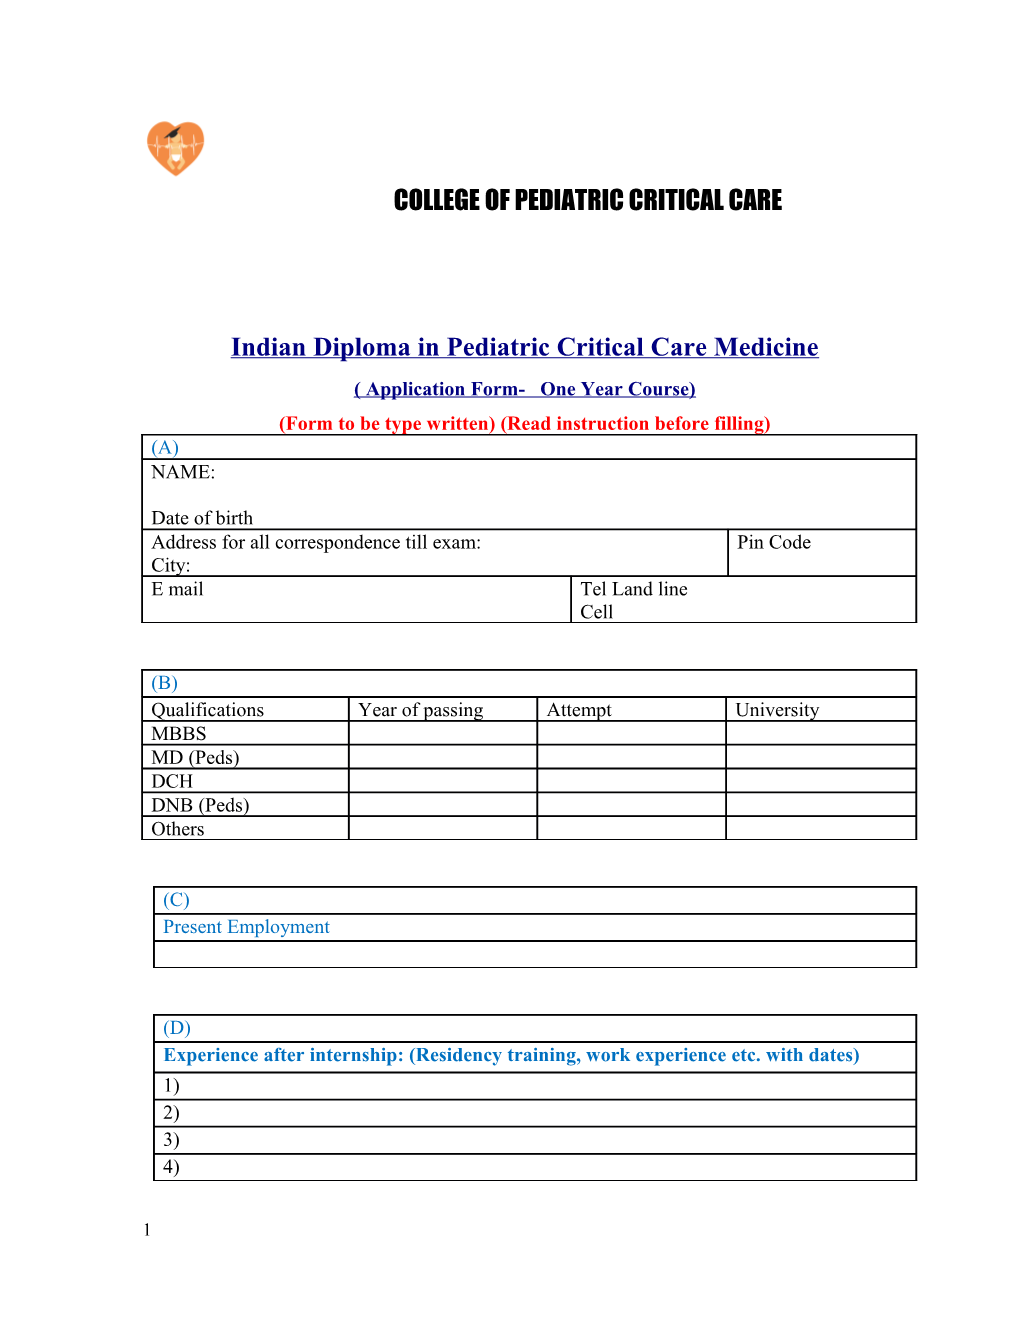 Application Form for Fellowship in Pediatric Intensive Care